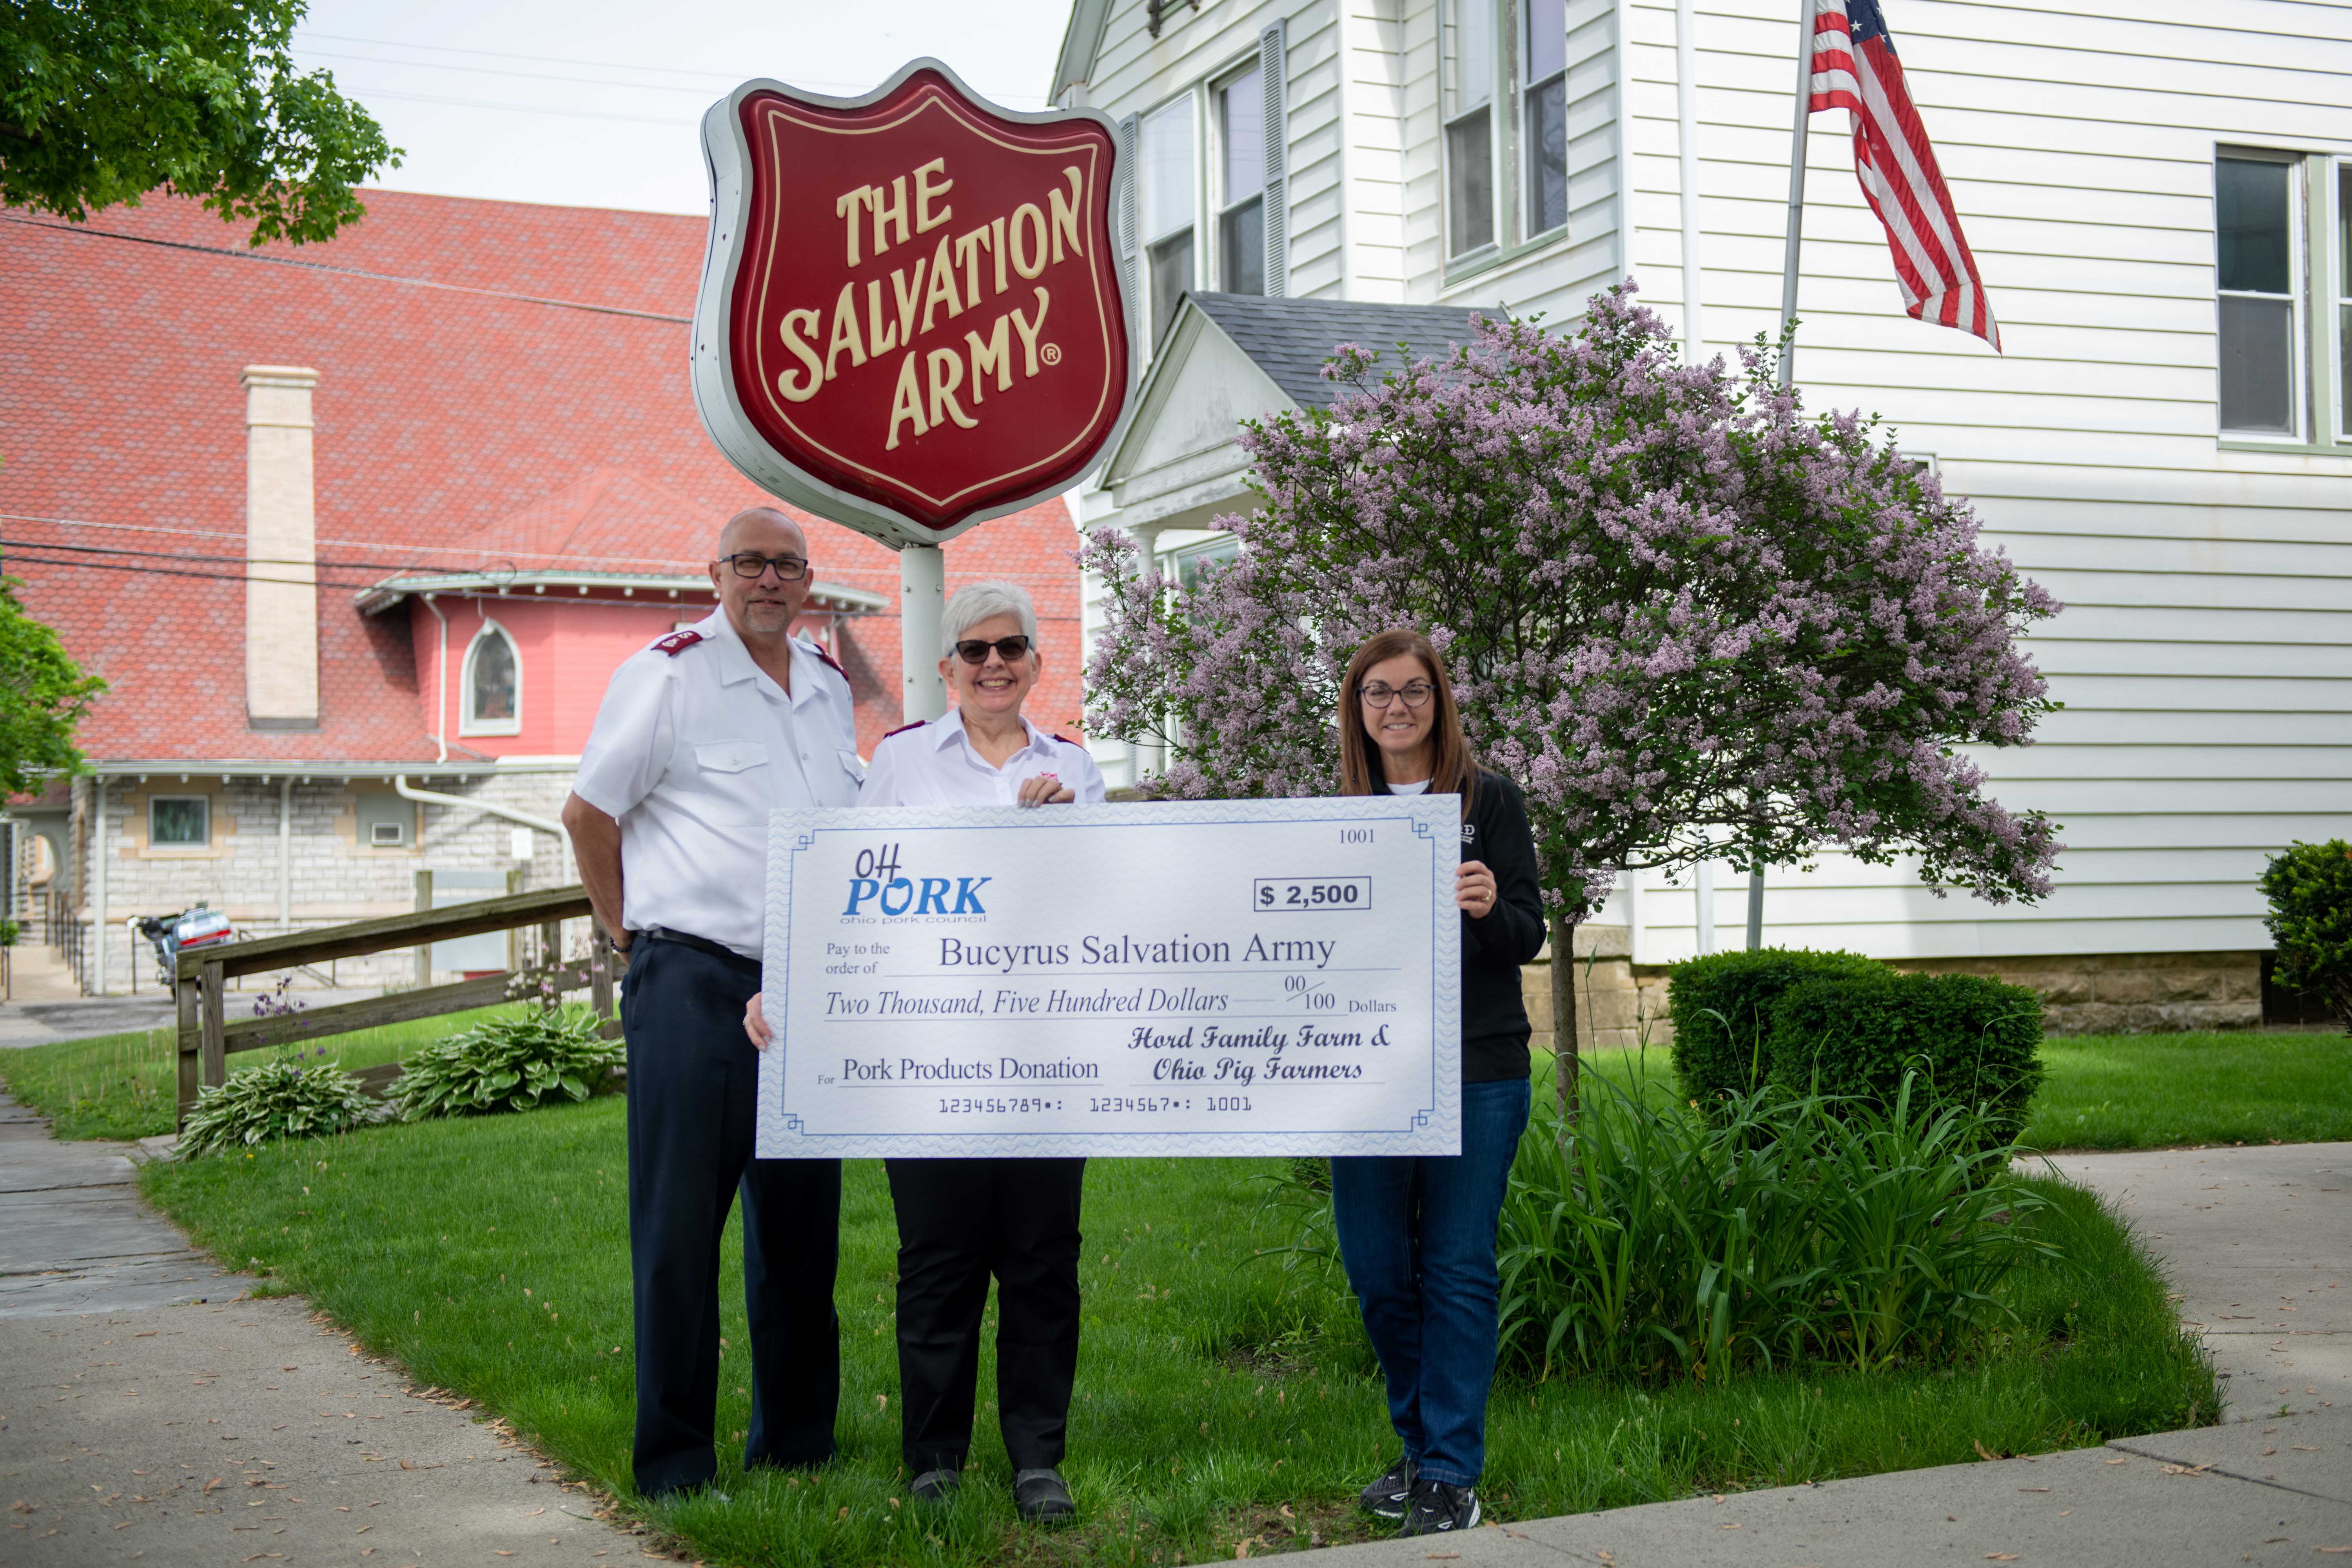  Janel Hord, from Hord Family Farms (far right), presented a check for $2,500 to Major Tom Grace and Major Debbra Grace at The Salvation Army in Bucyrus, Ohio. The organization will use the funds to purchase pork to help supply high-quality protein to those in need in Crawford County.